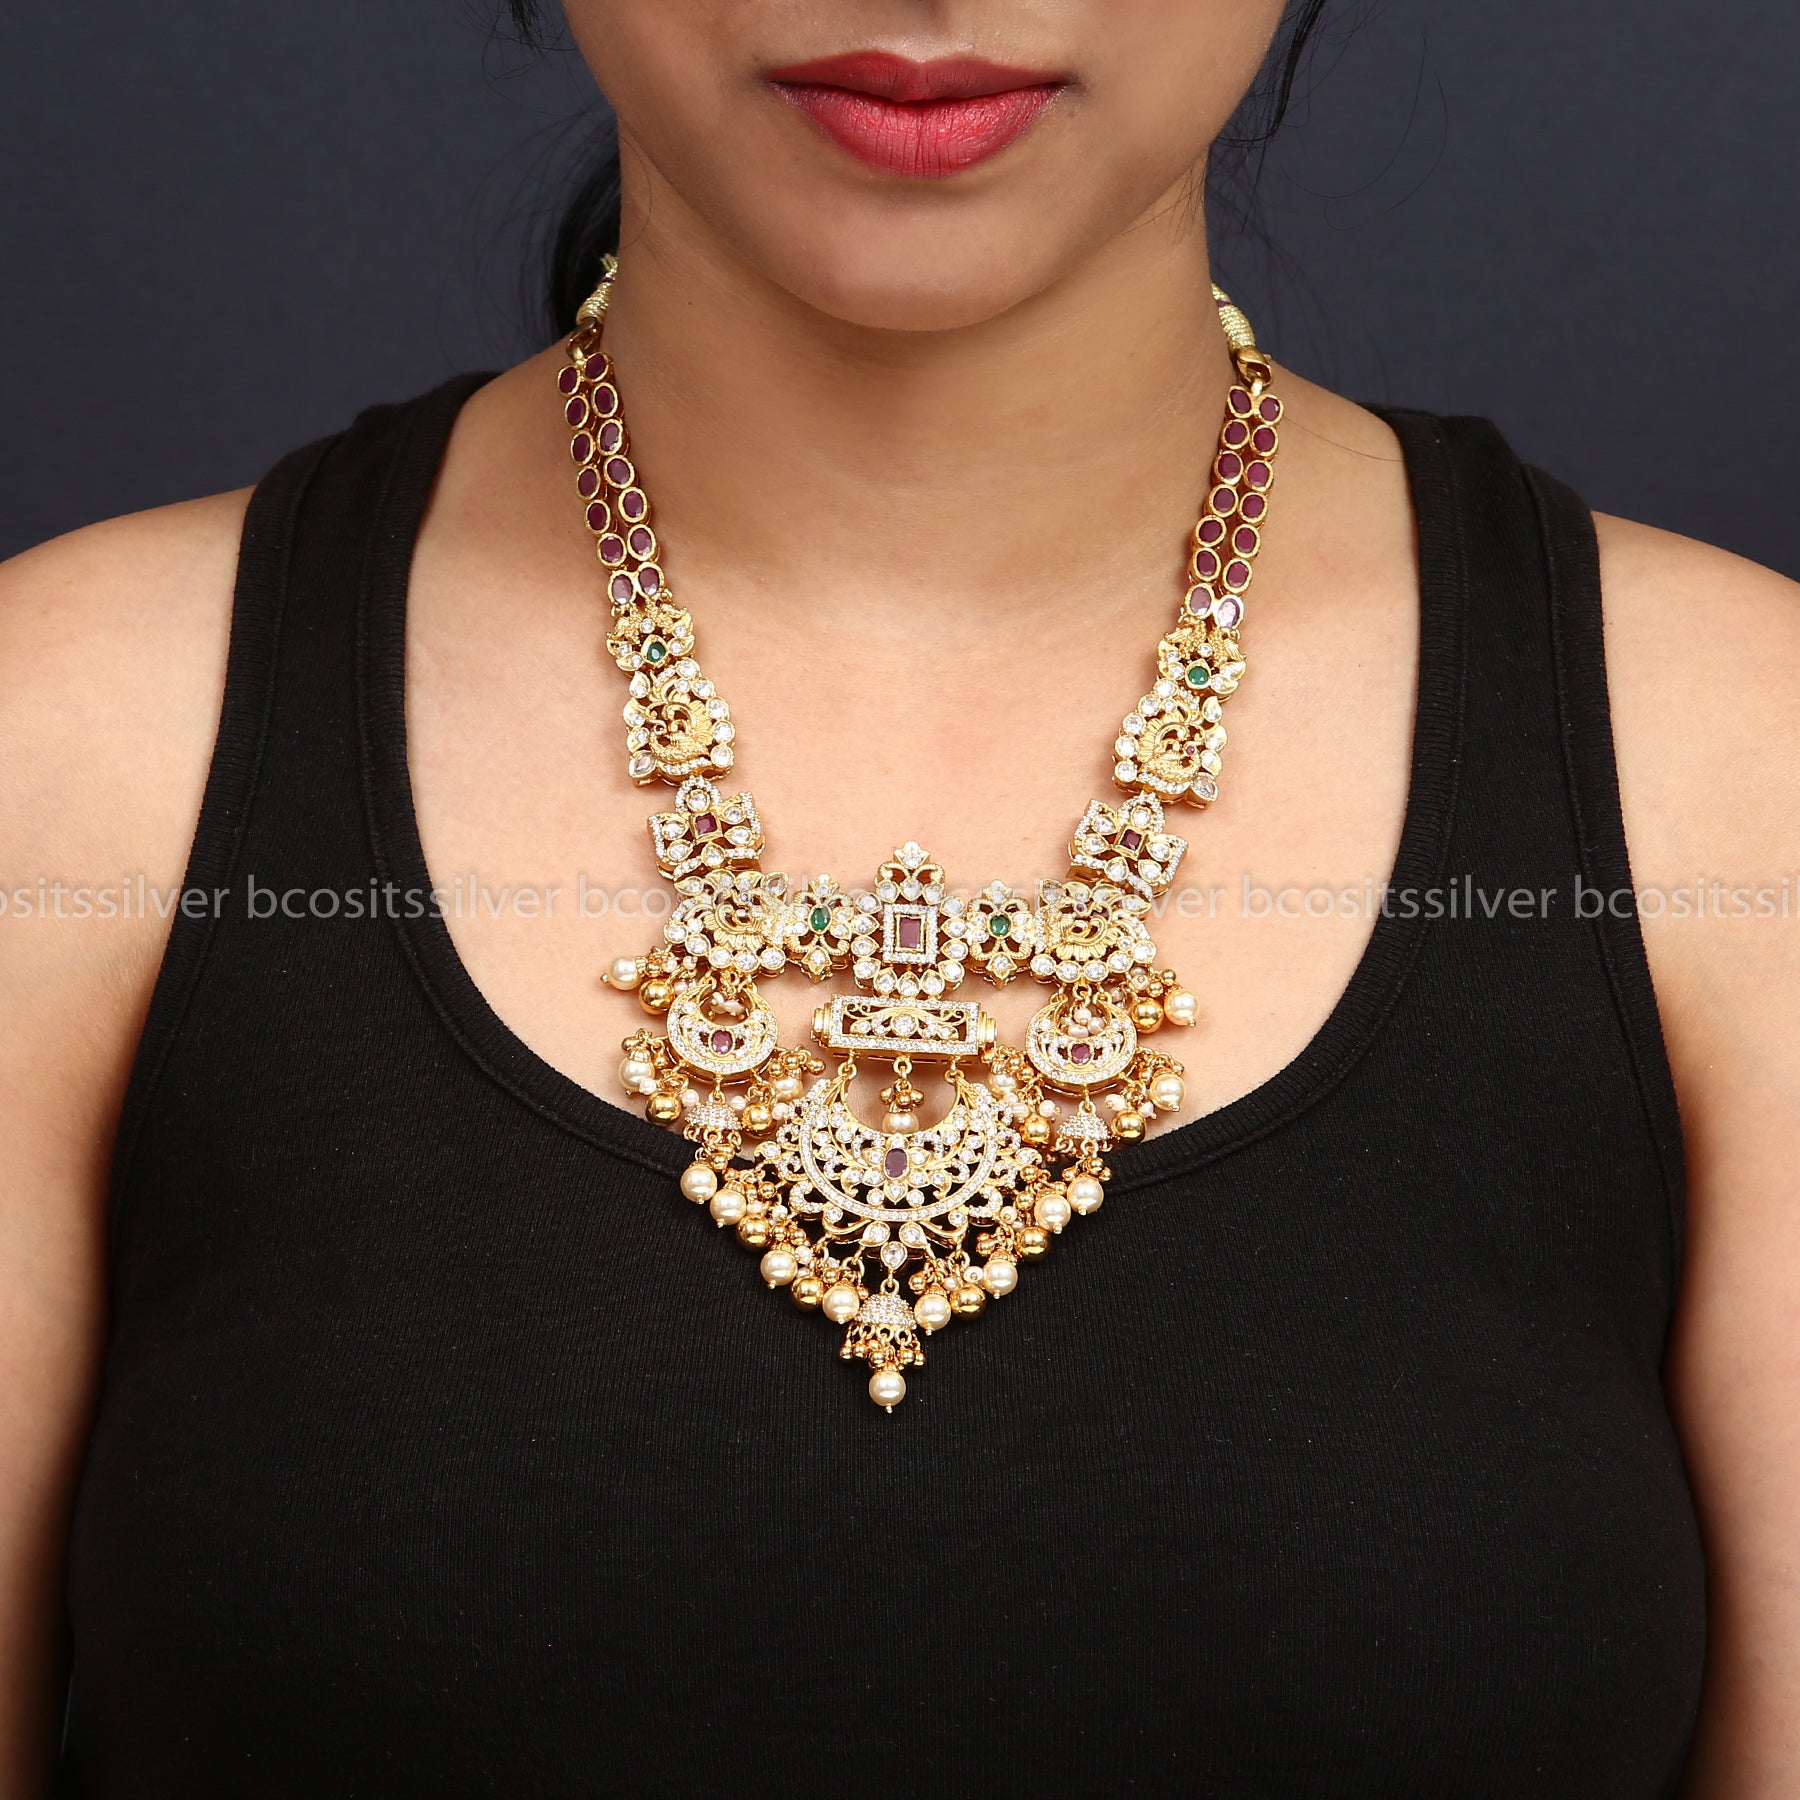 CZ - Bridal Triple Chand with Peacock Necklace - 0953 - MADE TO ORDER